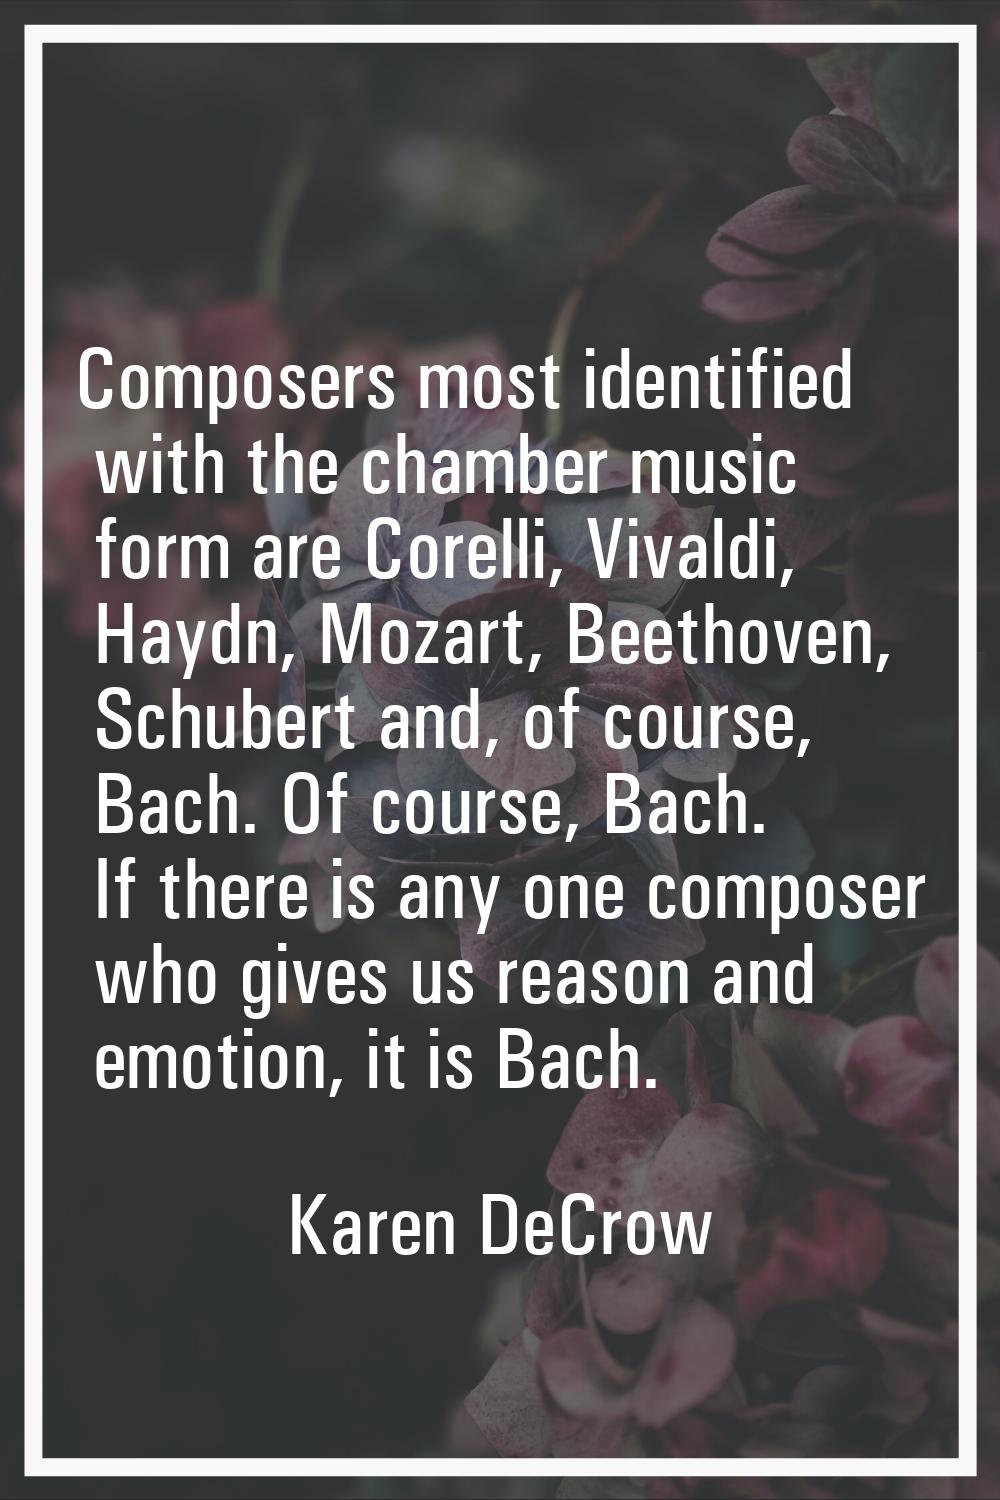 Composers most identified with the chamber music form are Corelli, Vivaldi, Haydn, Mozart, Beethove